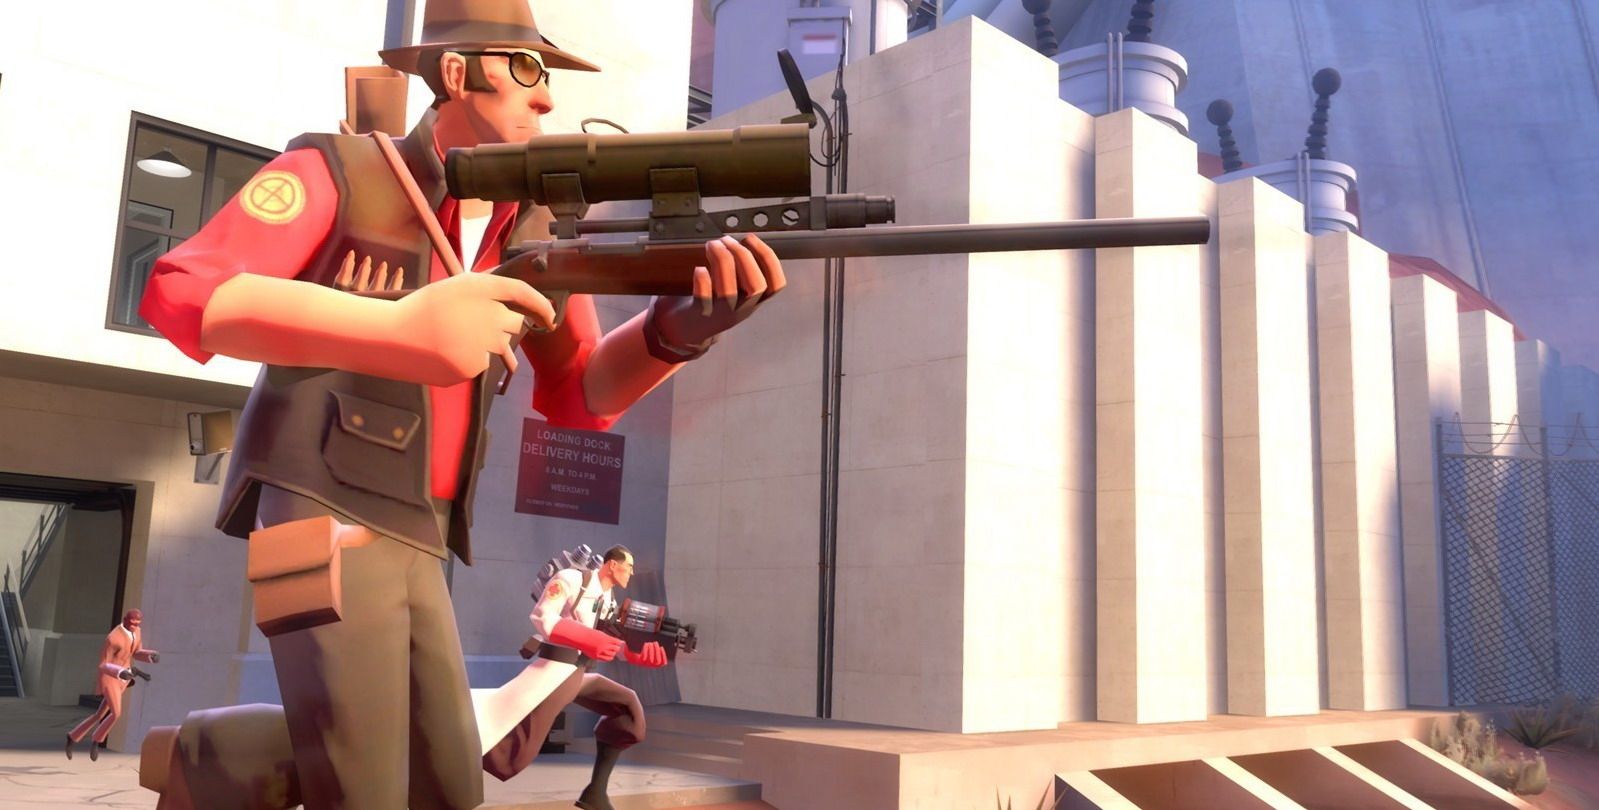 Team fortress 2 image 9